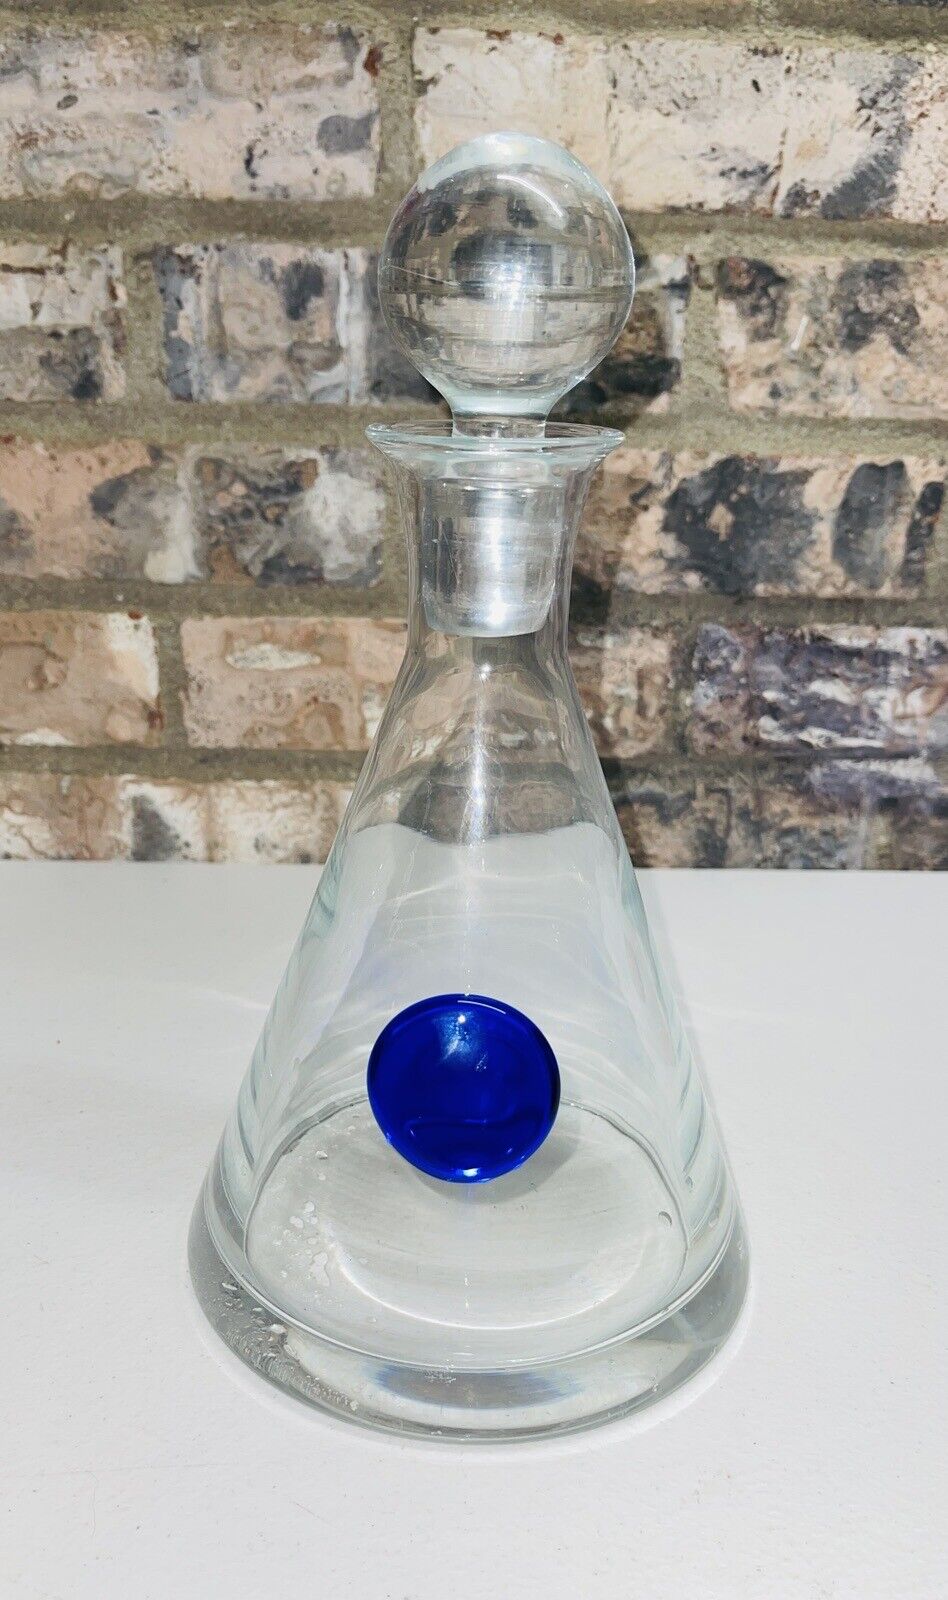 CIROC VODKA 24 OZ EMPTY BOTTLE CRYSTAL DECANTER COLLECTABLE FULL SIZE-RARE FIND